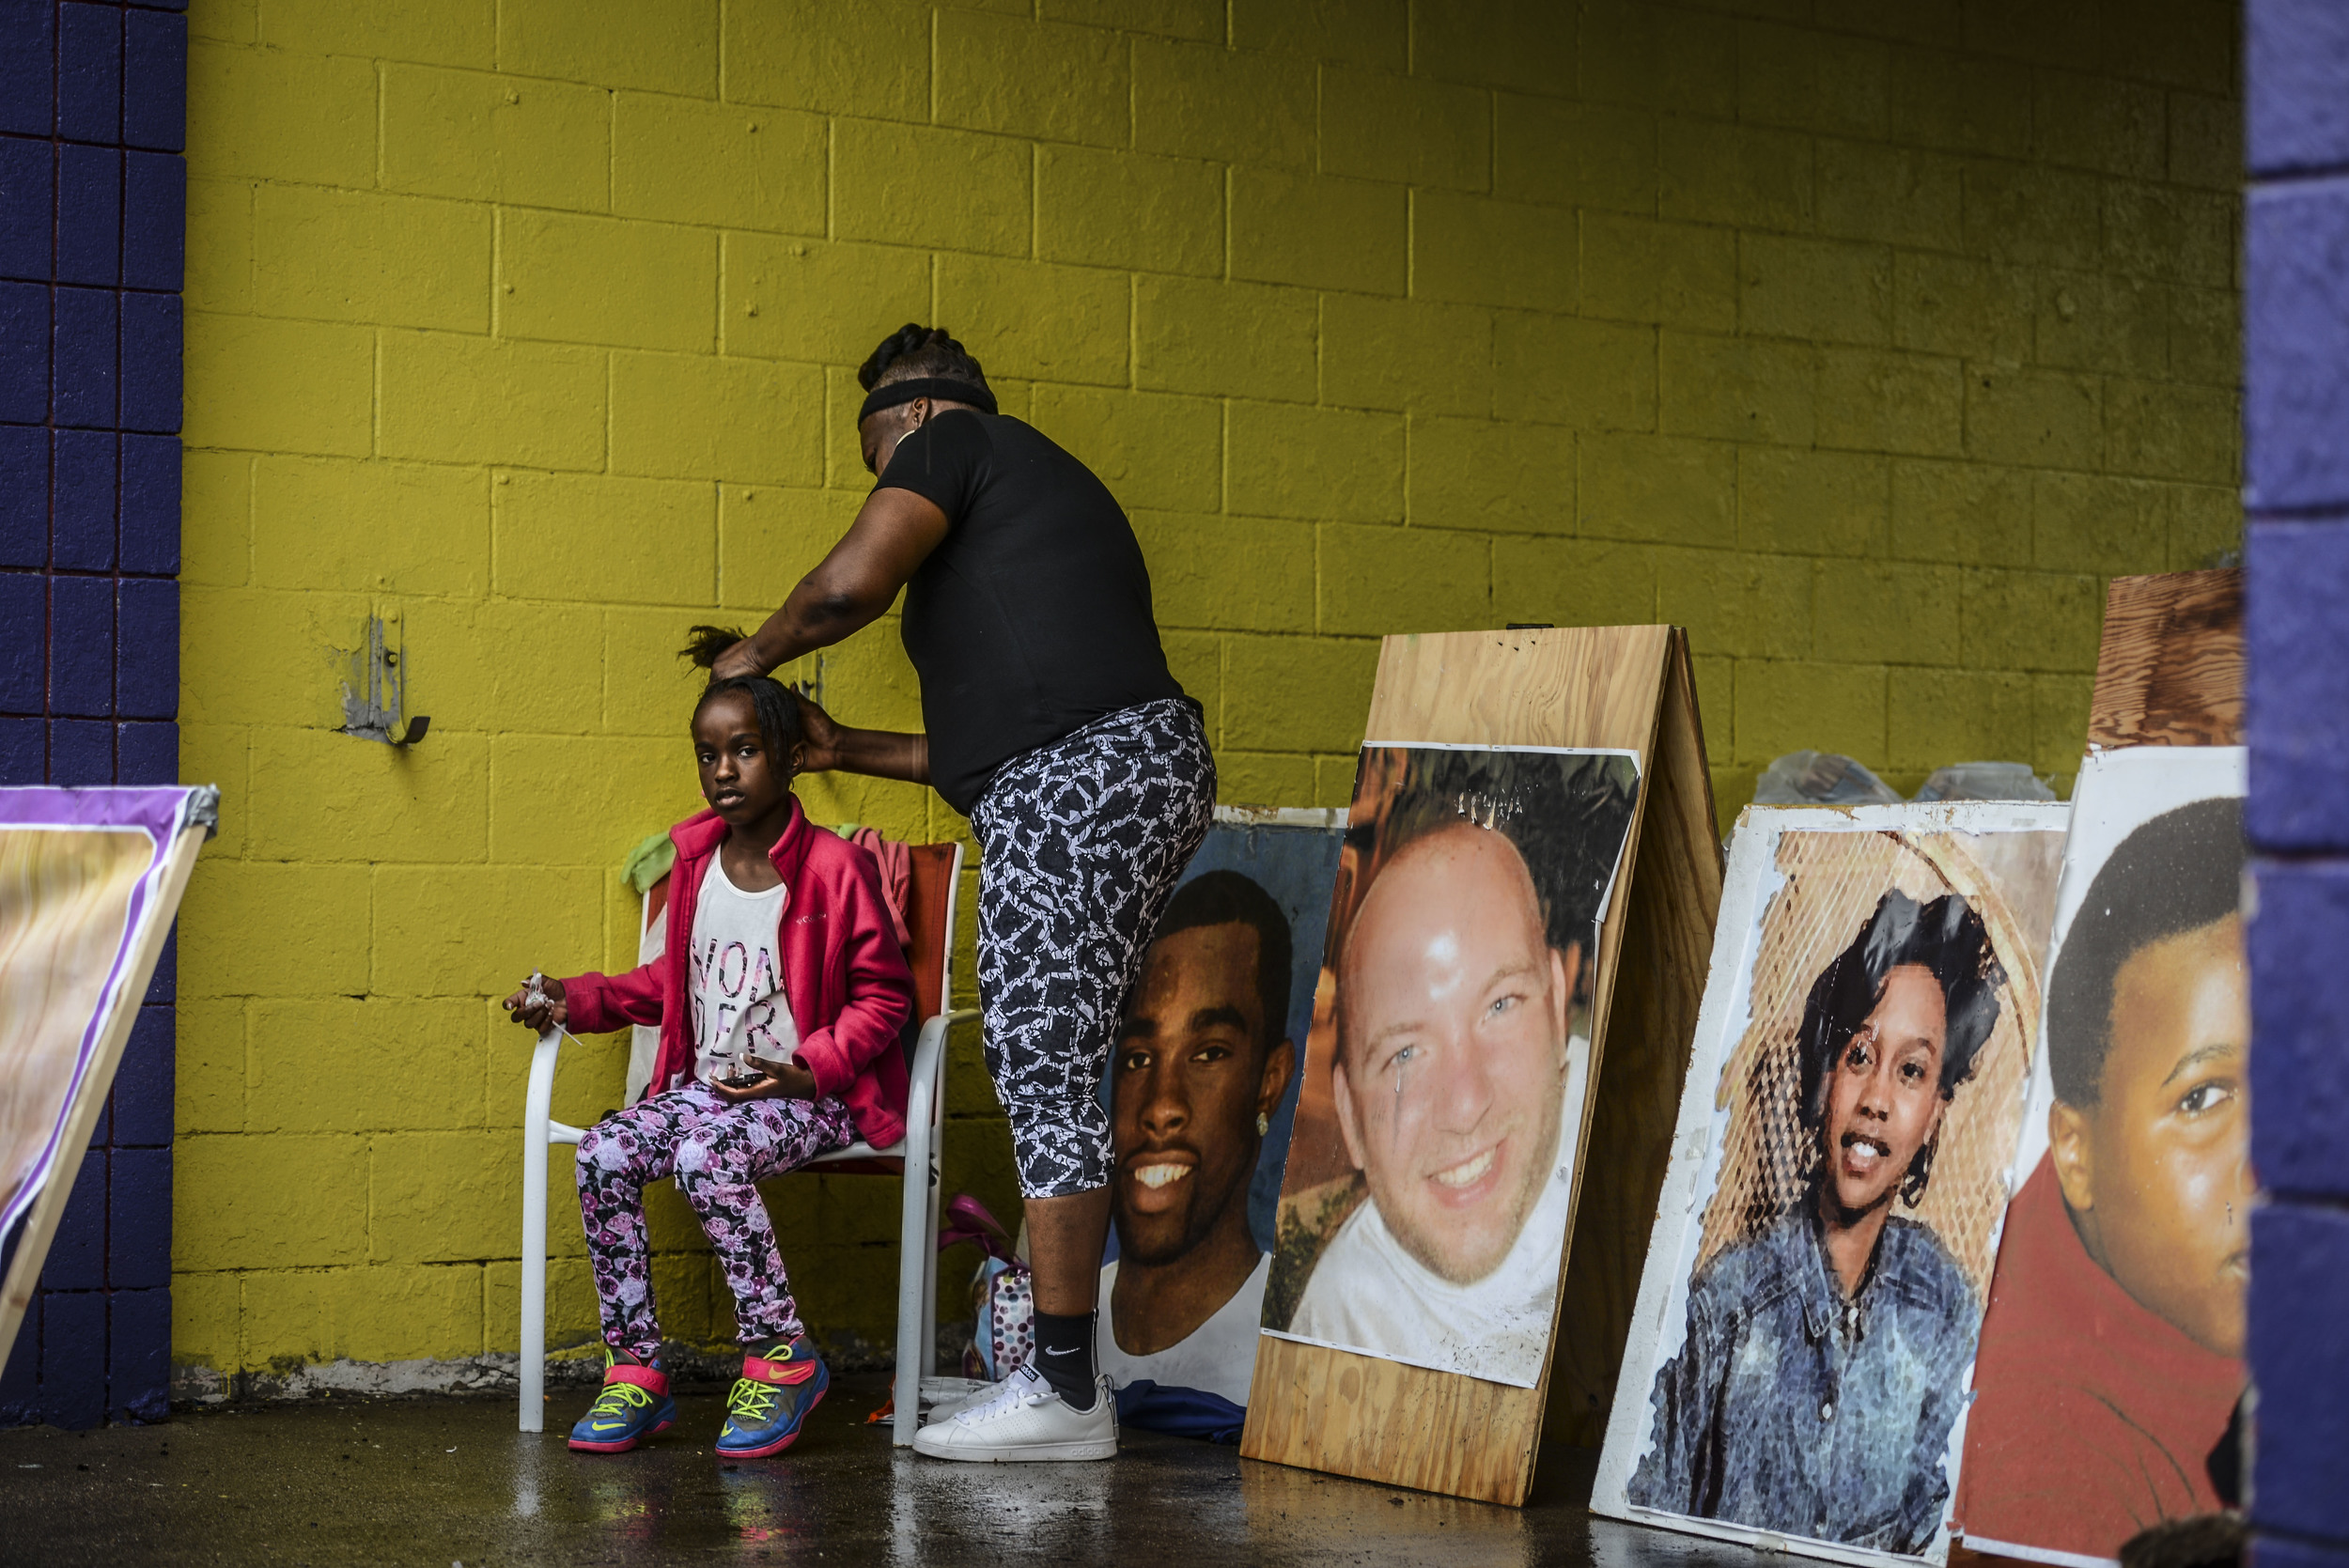  Jacqueline Thompkins does her granddaughter's hair, Dakari Thomkins, &nbsp;8-years-old, during a gathering after an organized march in response to the spike in violence on the city's southeast side, Saturday, Aug. 29, 2015, at Franklin Street and Ea